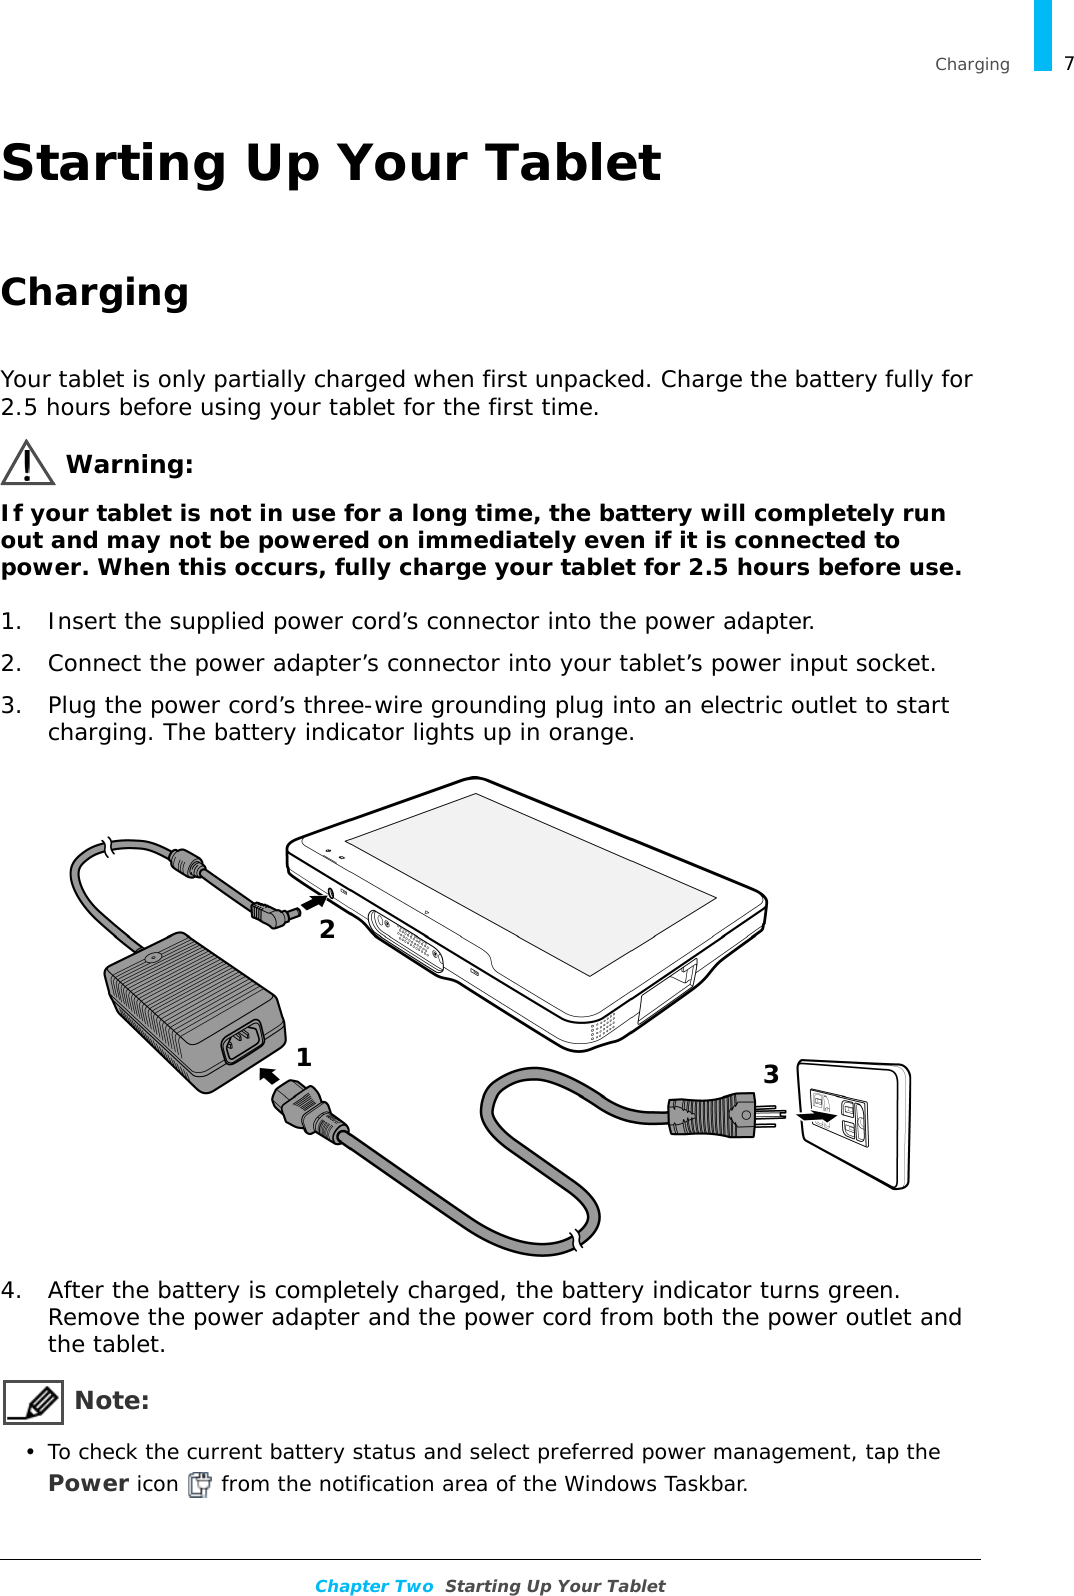   Charging 7Chapter Two  Starting Up Your TabletStarting Up Your TabletChargingYour tablet is only partially charged when first unpacked. Charge the battery fully for 2.5 hours before using your tablet for the first time.Warning:If your tablet is not in use for a long time, the battery will completely run out and may not be powered on immediately even if it is connected to power. When this occurs, fully charge your tablet for 2.5 hours before use.1. Insert the supplied power cord’s connector into the power adapter.2. Connect the power adapter’s connector into your tablet’s power input socket.3. Plug the power cord’s three-wire grounding plug into an electric outlet to start charging. The battery indicator lights up in orange.4. After the battery is completely charged, the battery indicator turns green. Remove the power adapter and the power cord from both the power outlet and the tablet. Note:• To check the current battery status and select preferred power management, tap the Power icon   from the notification area of the Windows Taskbar.123